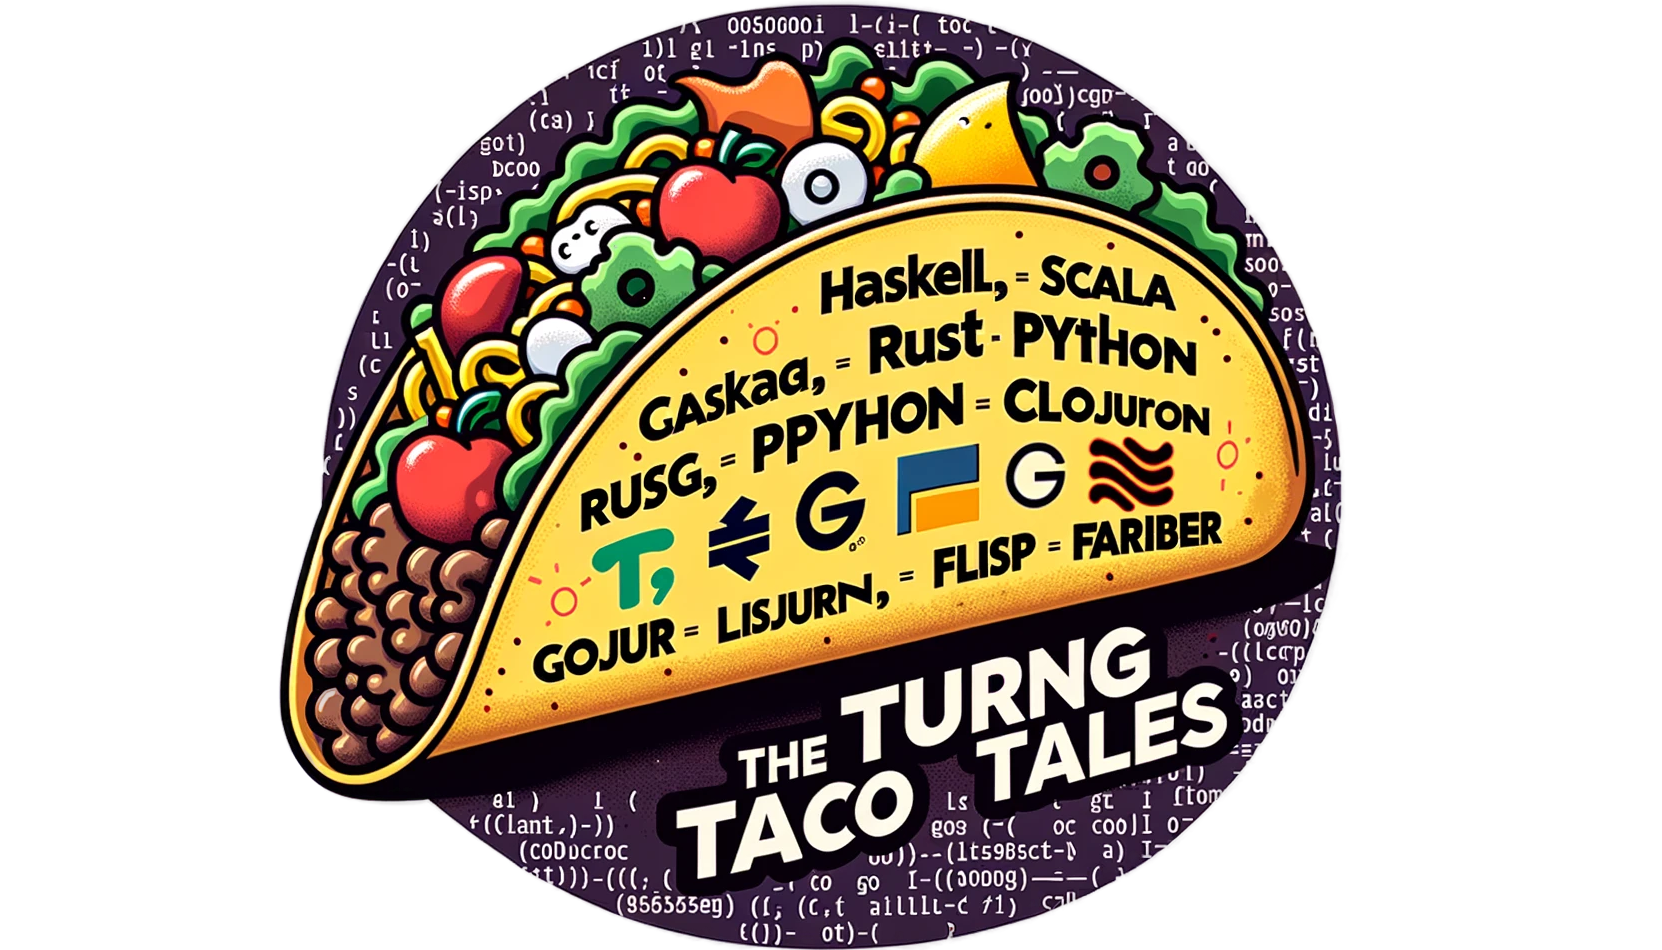 The Turing Taco Tales